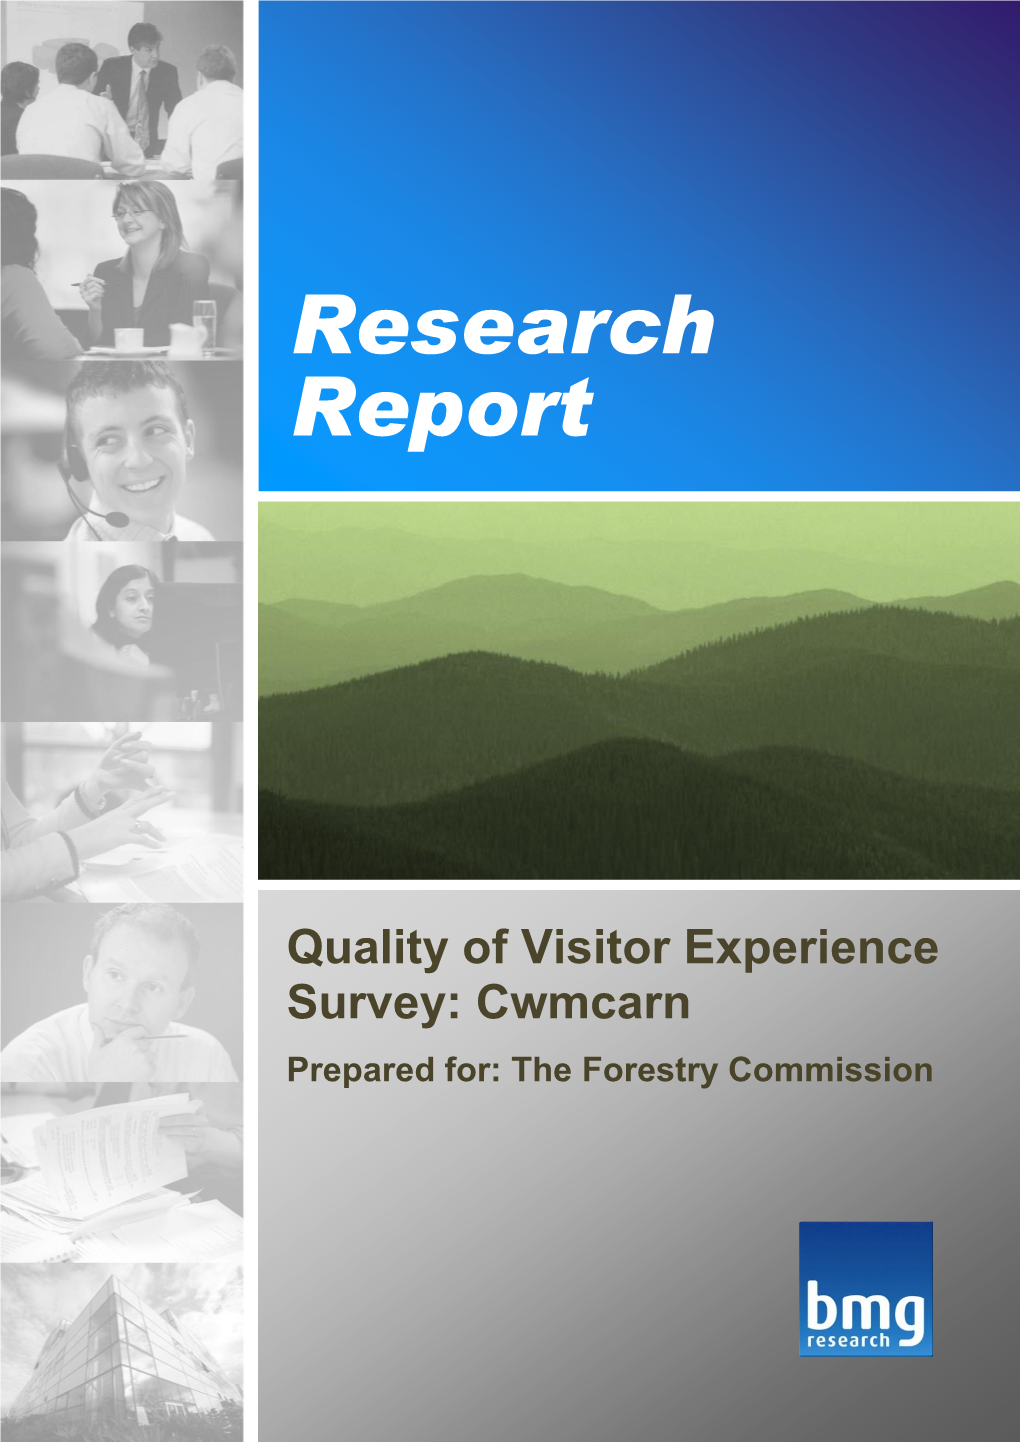 Quality of Visitor Experience Survey: Cwmcarn